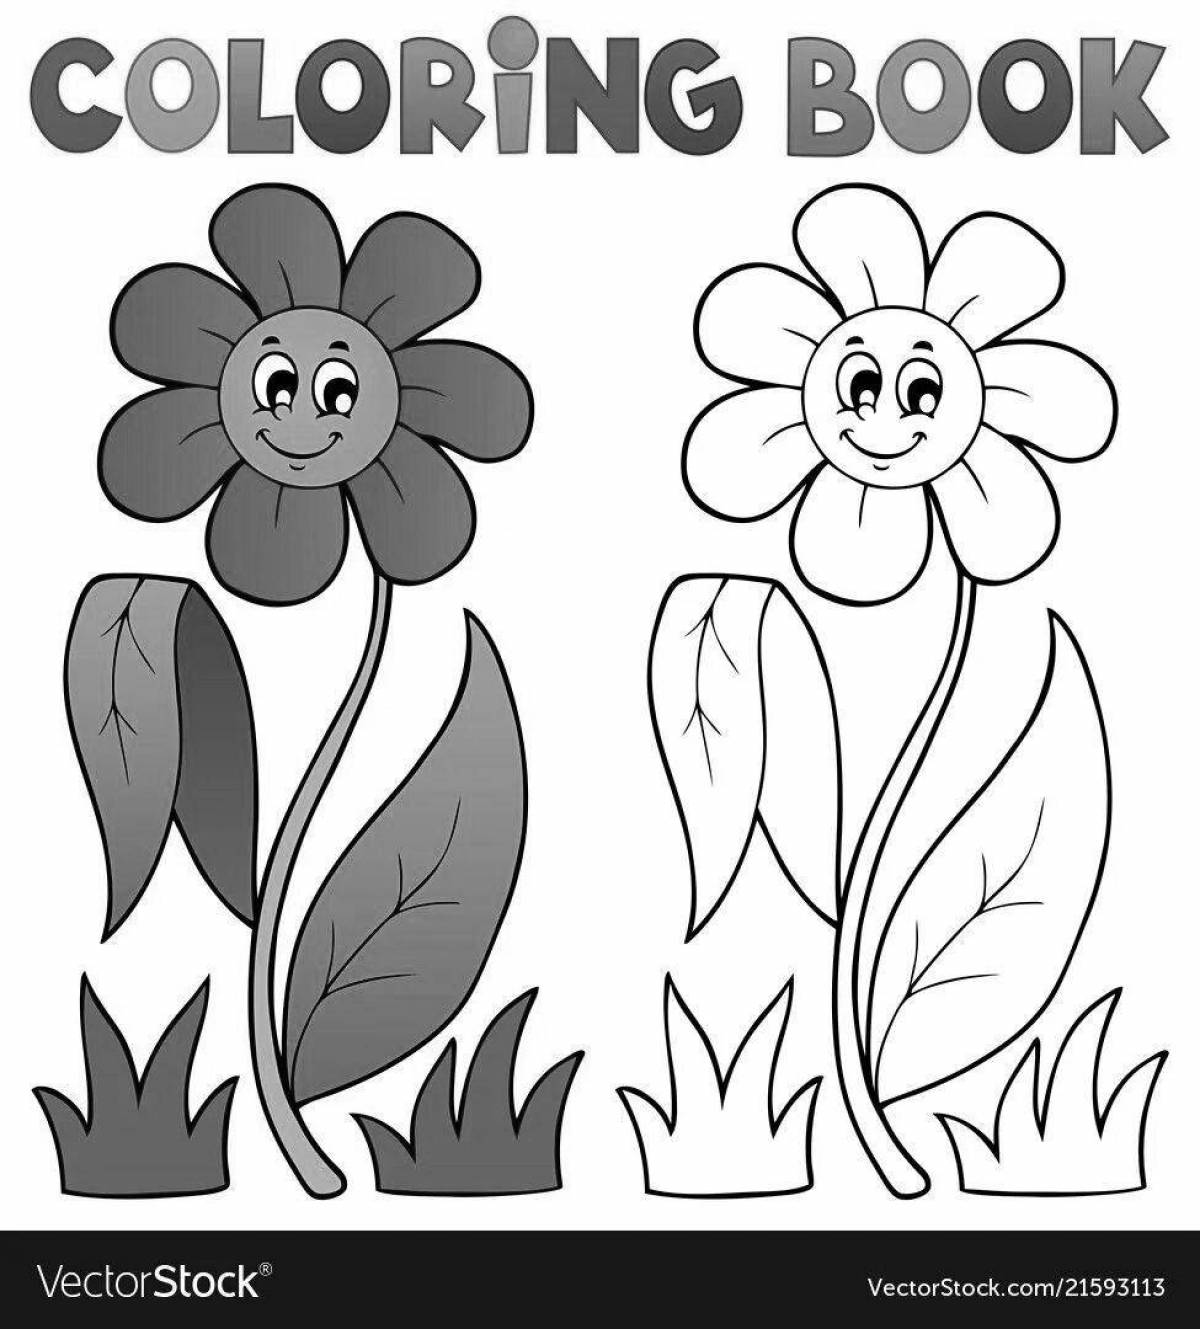 Incredible coloring book for 3-4 year olds